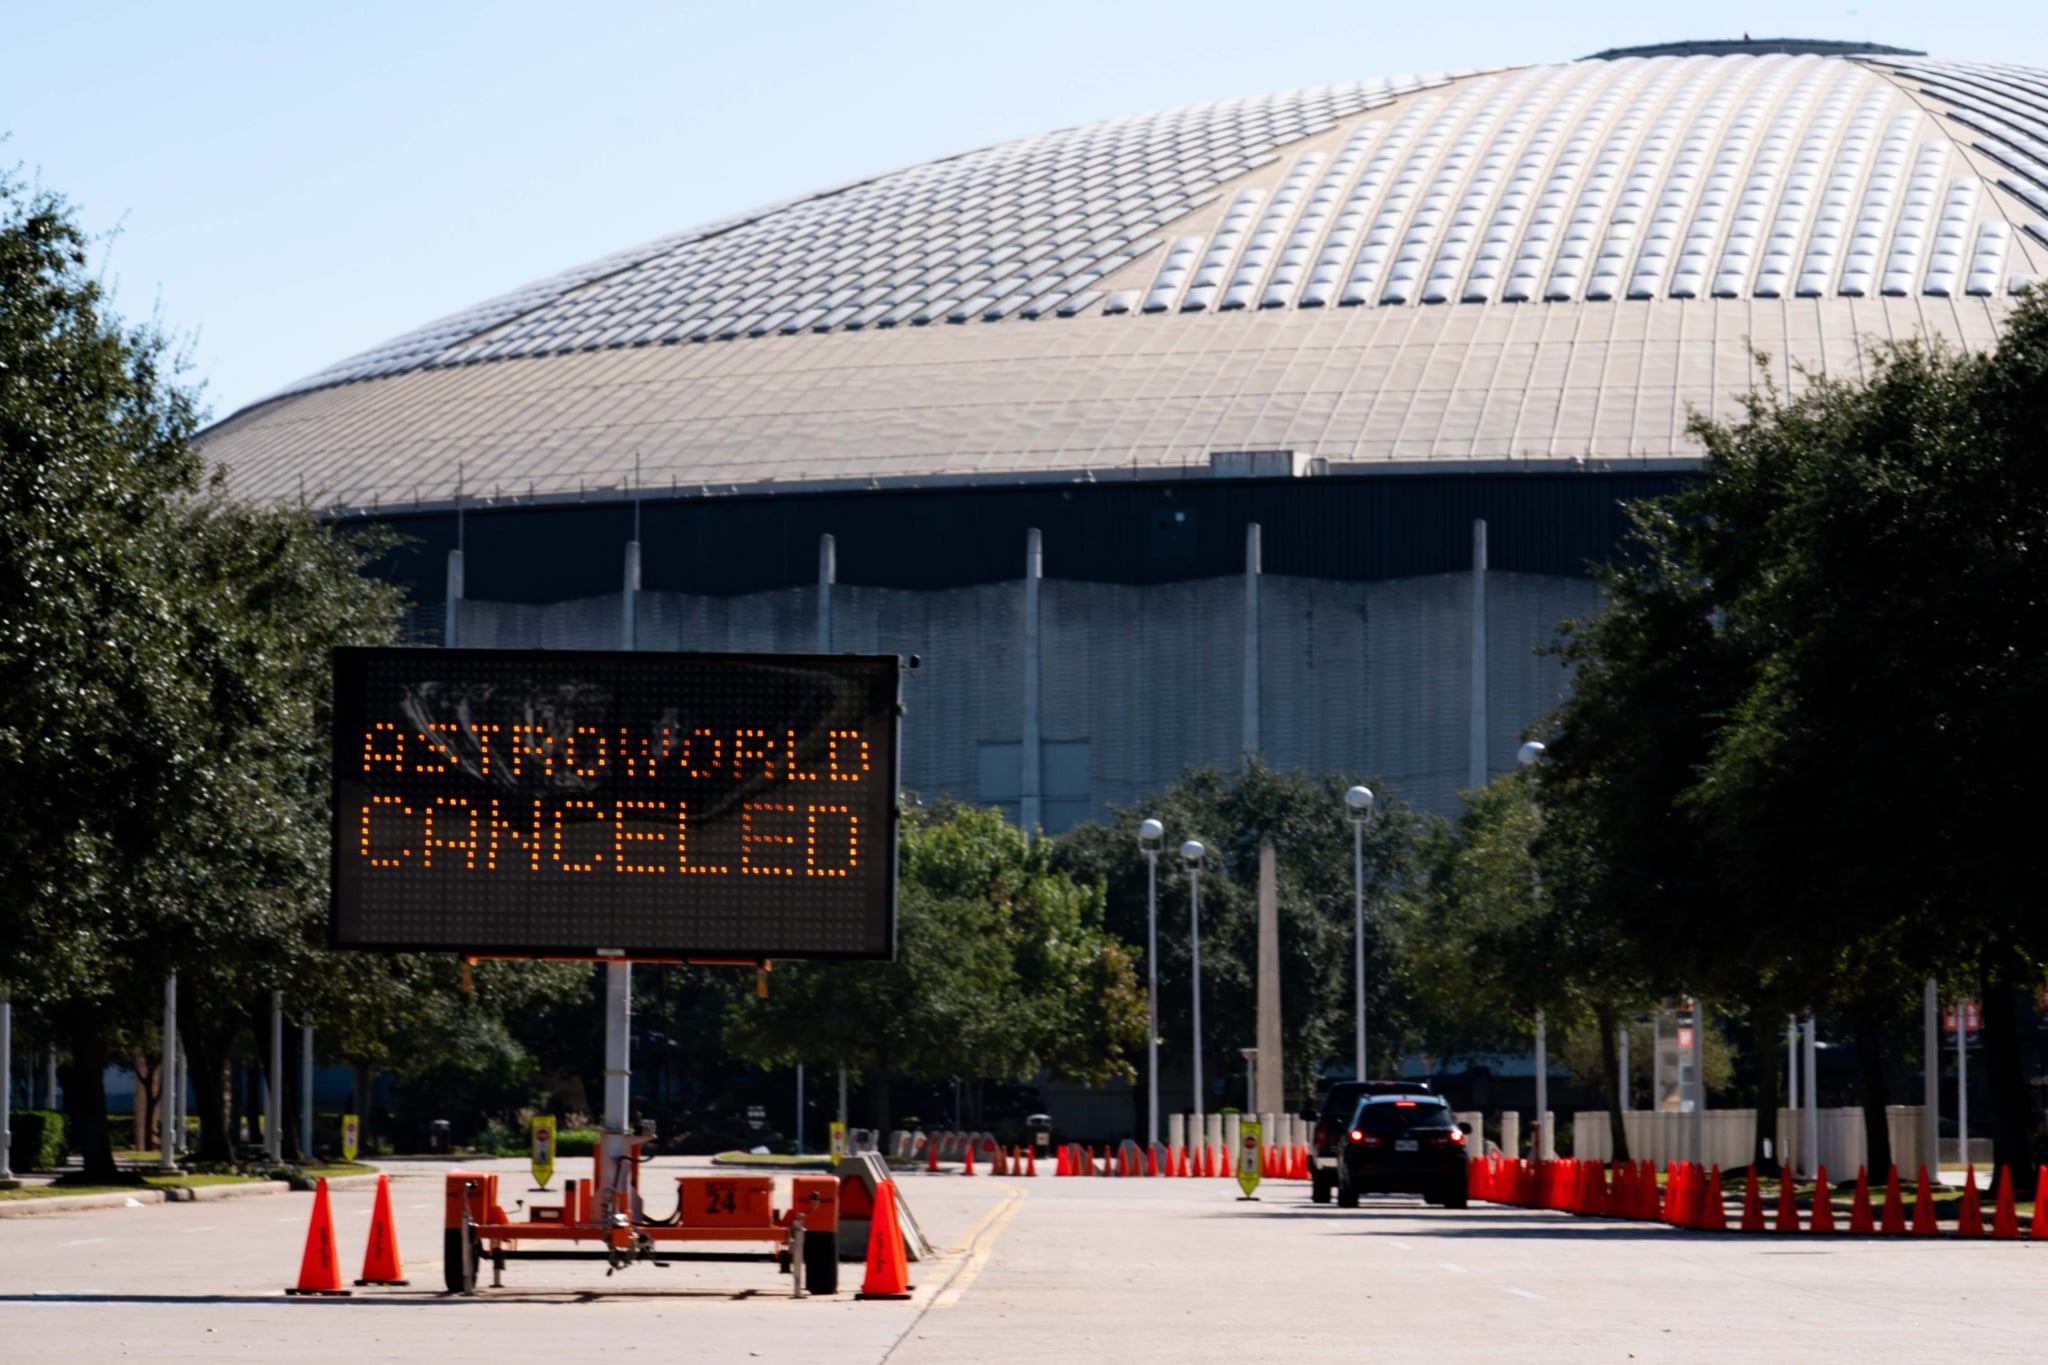 HOUSTON, TX - NOVEMBER 06: A street sign showing the cancellation of the AstroWorld Festival at NRG Park on November 6, 2021 in Houston, Texas. According to authorities, eight people died and 17 people were transported to local hospitals after what they describe as a crowd surge at the Astroworld festival, a music festival started by Houston-native rapper and musician Travis Scott in 2018.  (Photo by Alex Bierens de Haan/Getty Images)